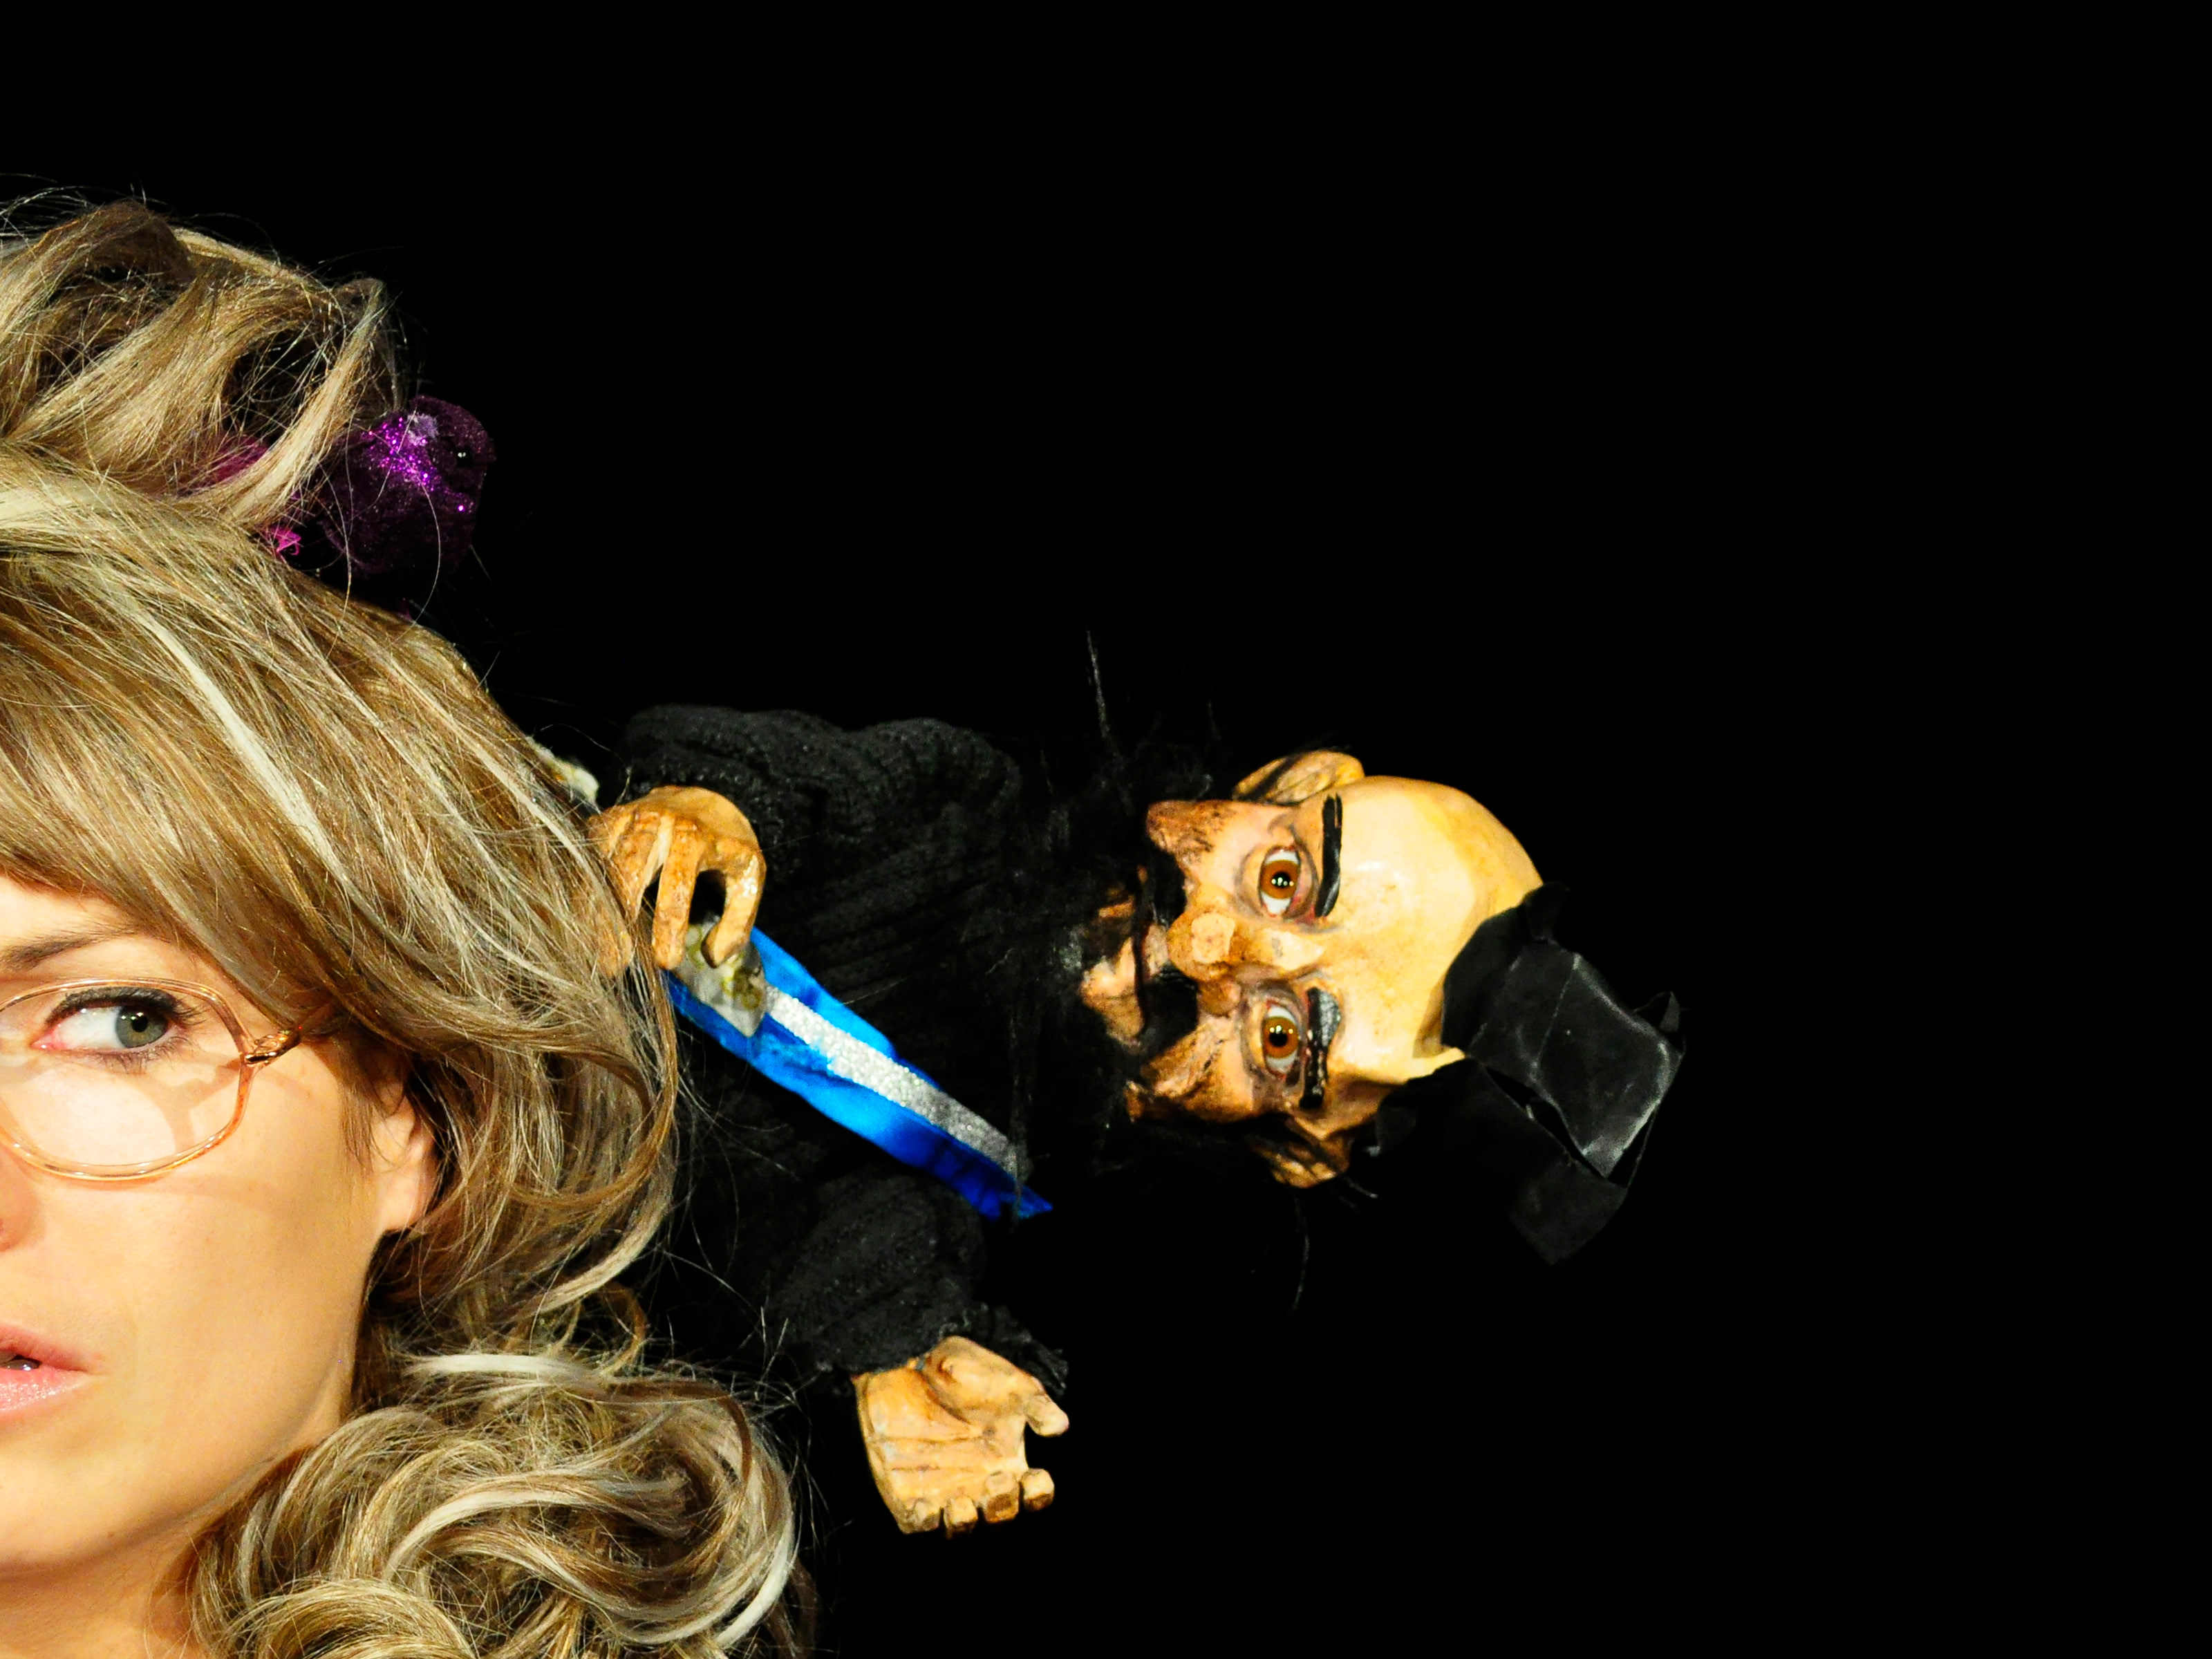 The face of a middle-aged woman with a blonde wig and rimless glasses is half-cut. On her head sits the doll of a darkly dressed man with a top hat and beard.